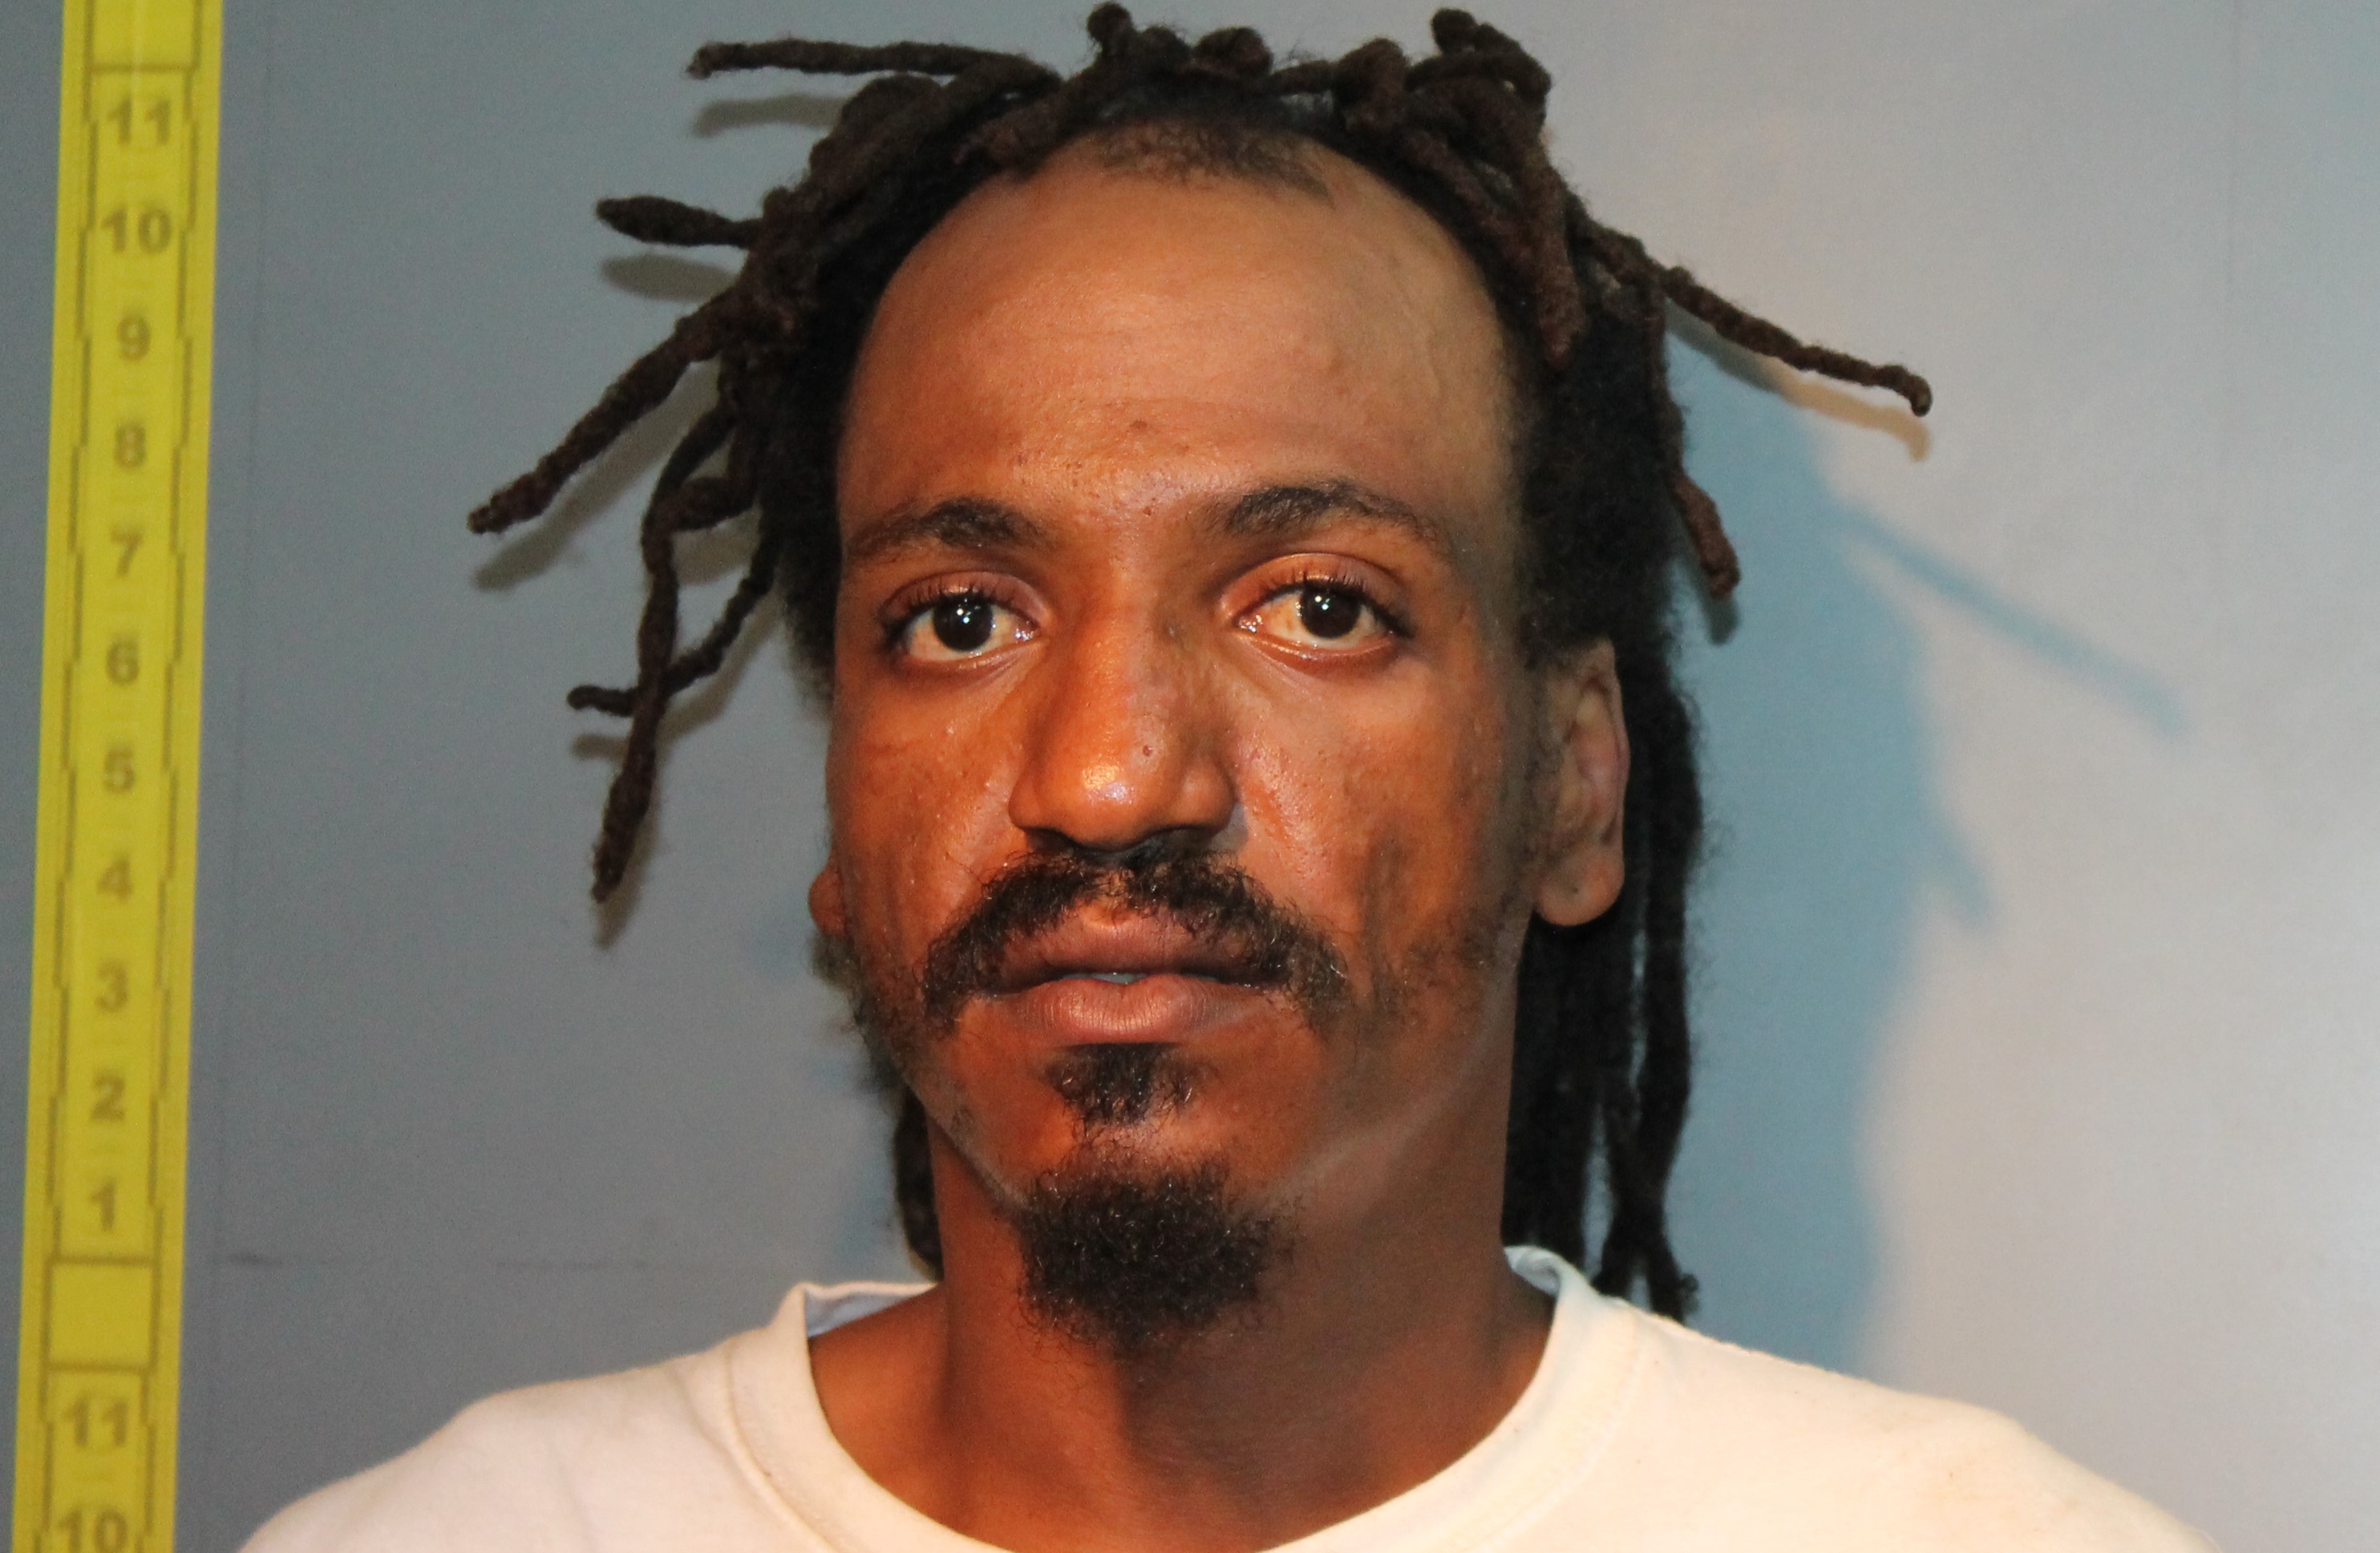 St. Croix's Shawki Thomas Arrested On Charges Of Strangling A Woman: VIPD